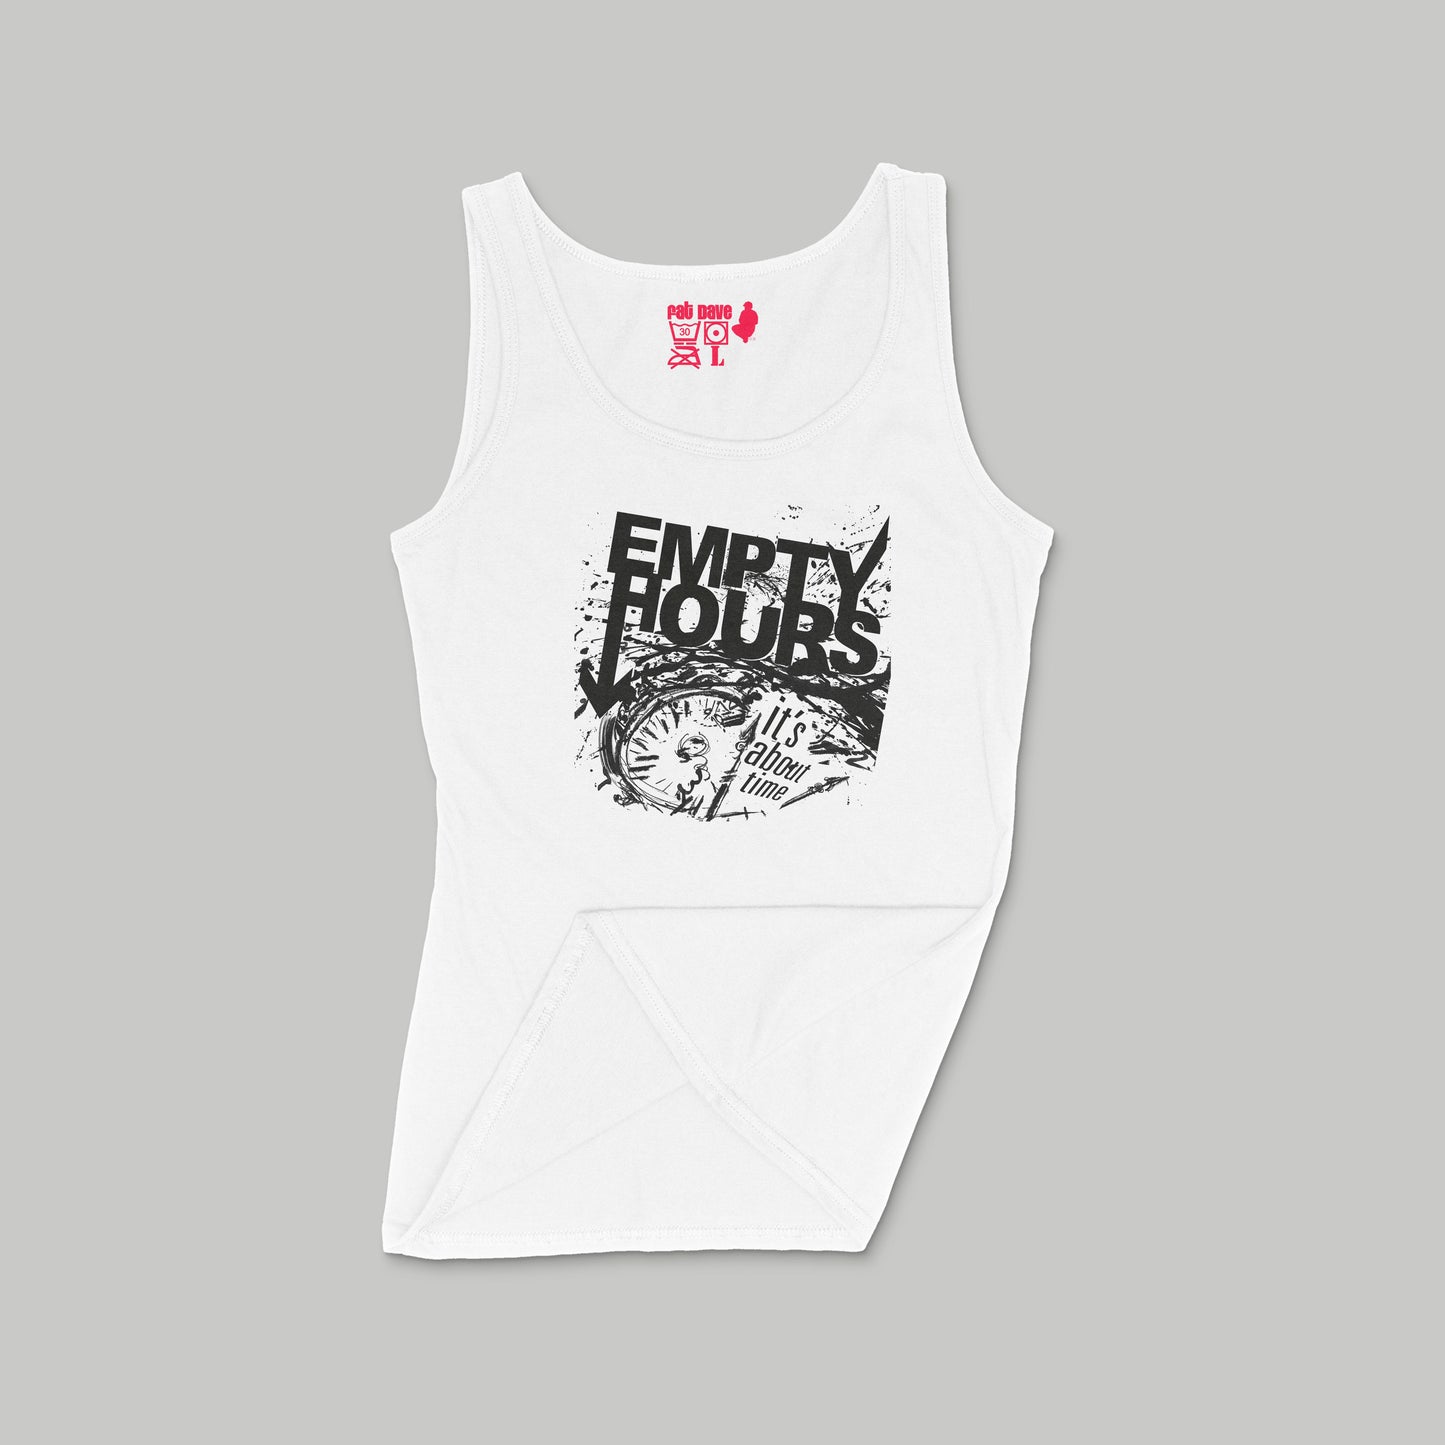 Brantford, Empty Hours, Fat Dave, It's About Time album cover, Ladies Tank Top, Musician, White